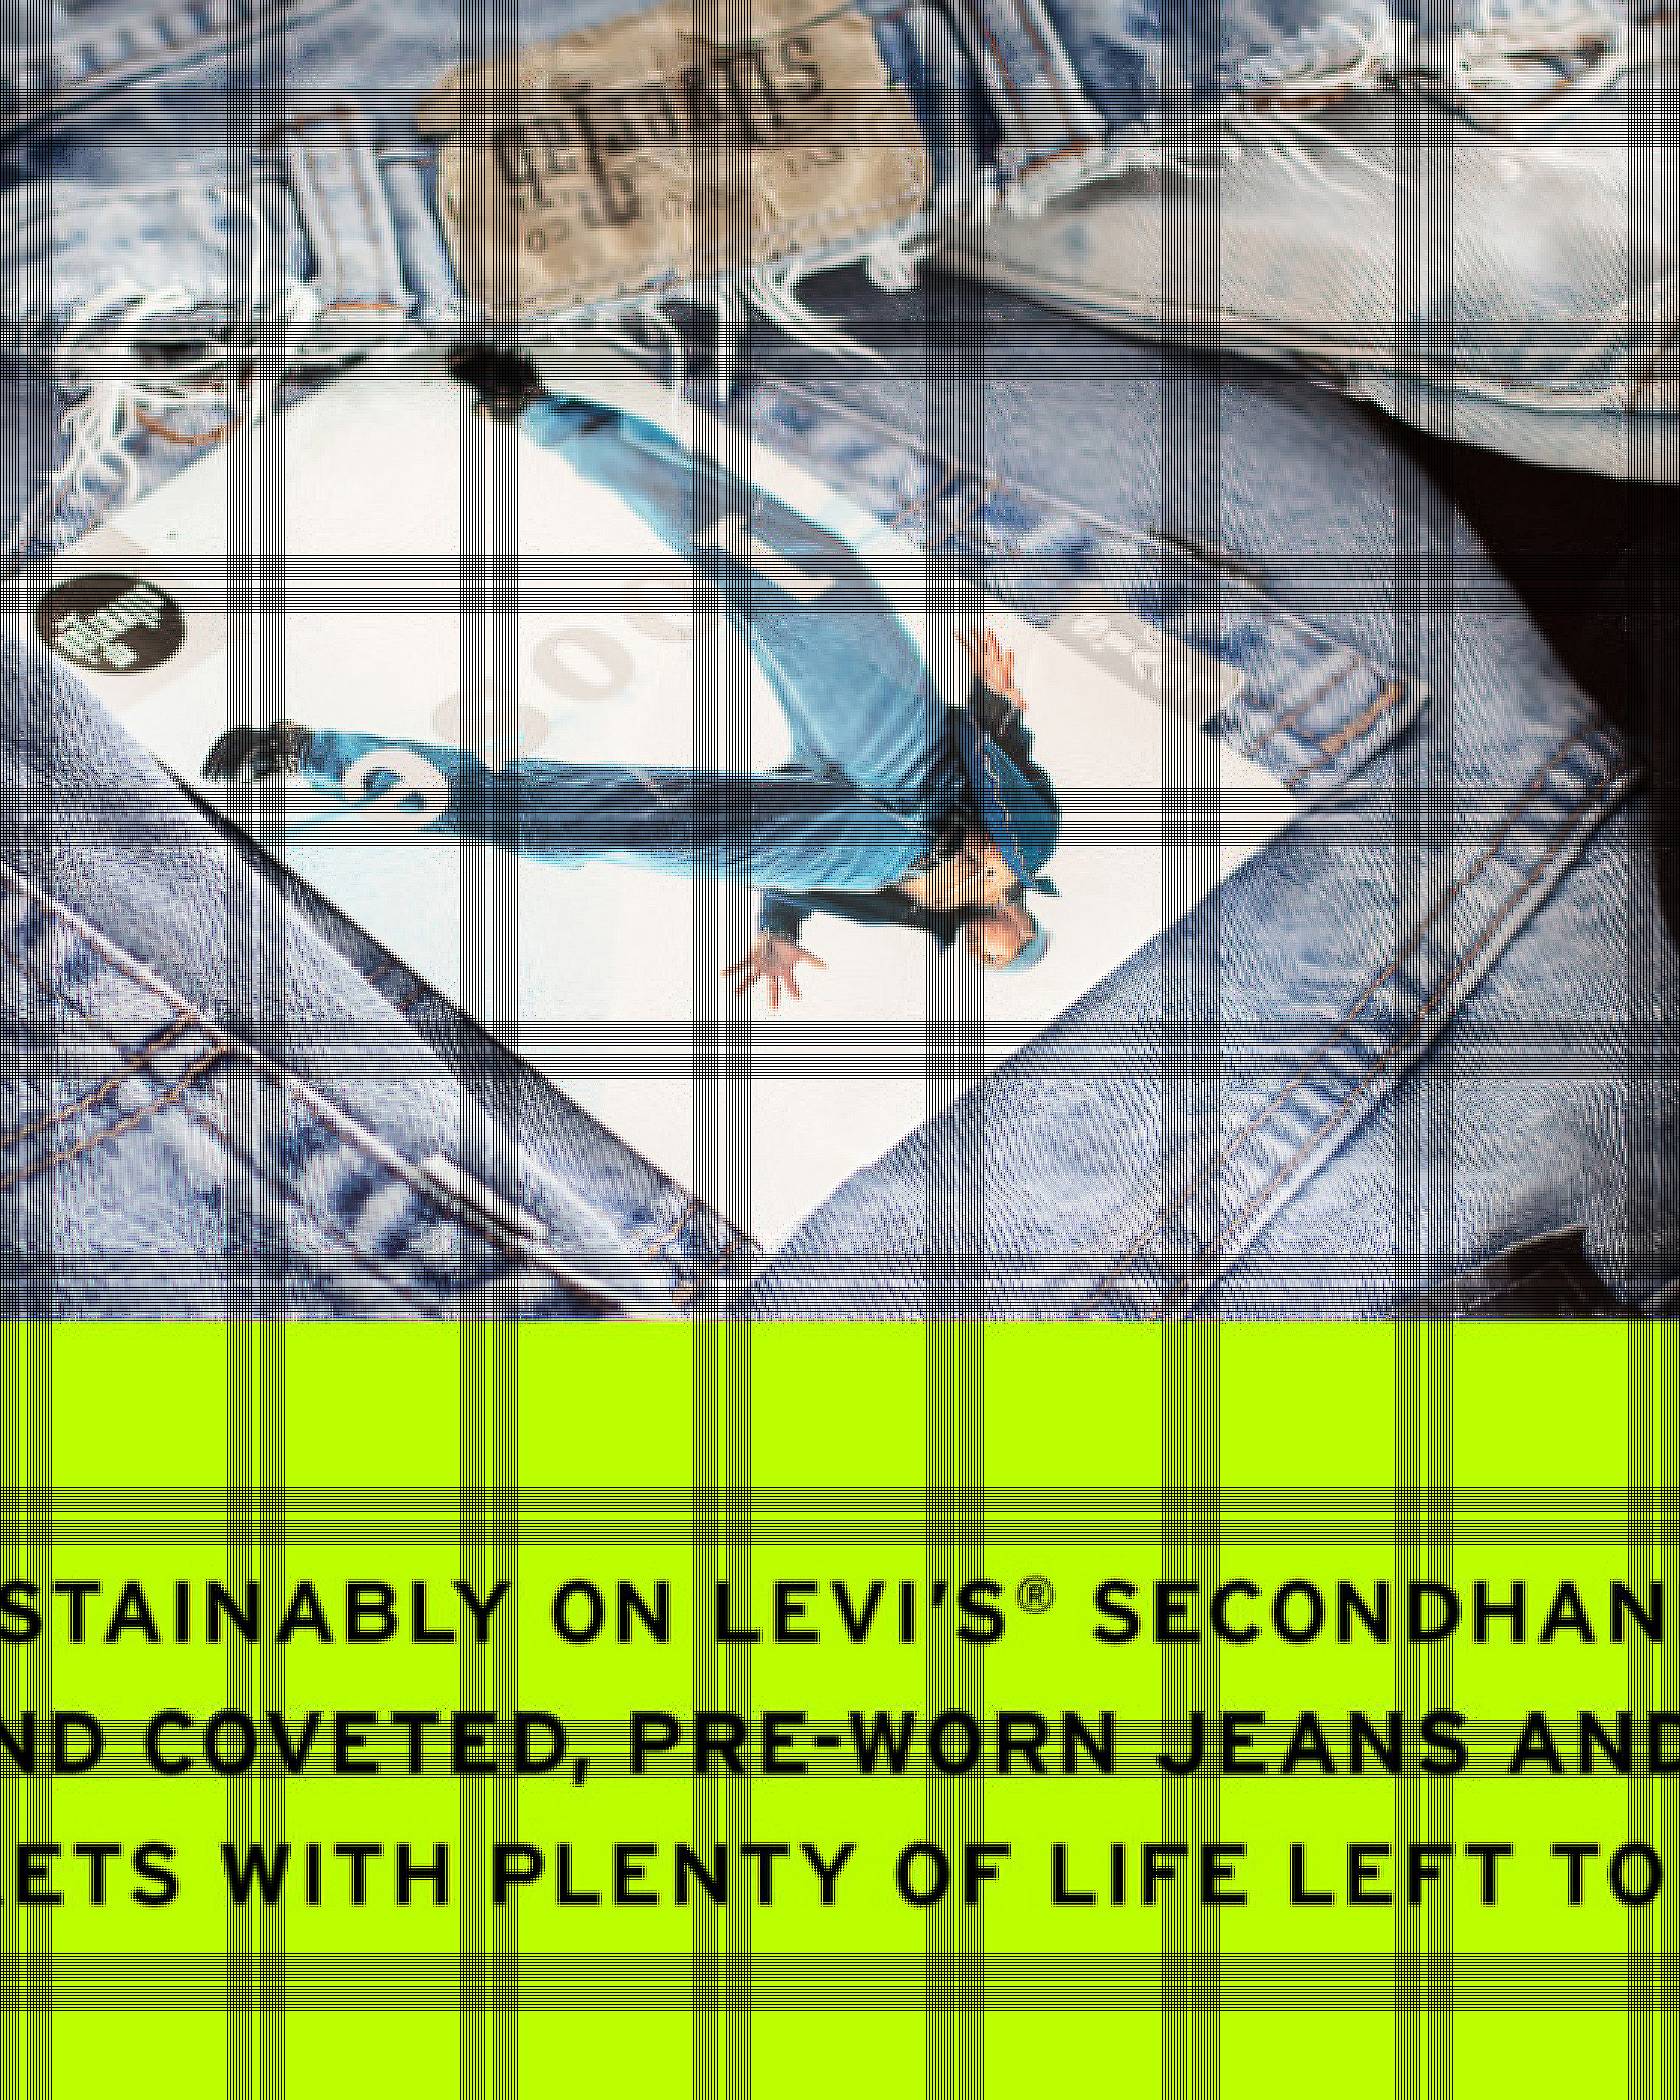 Photo of Levi's SilverTab jeans overlaid on a neon green background. Below the image there is text reading: Shop sustainability on Levi's SecondHand, where you'll find coveted, pre-worn jeans and Trucker Jackets with plenty of life left to live.